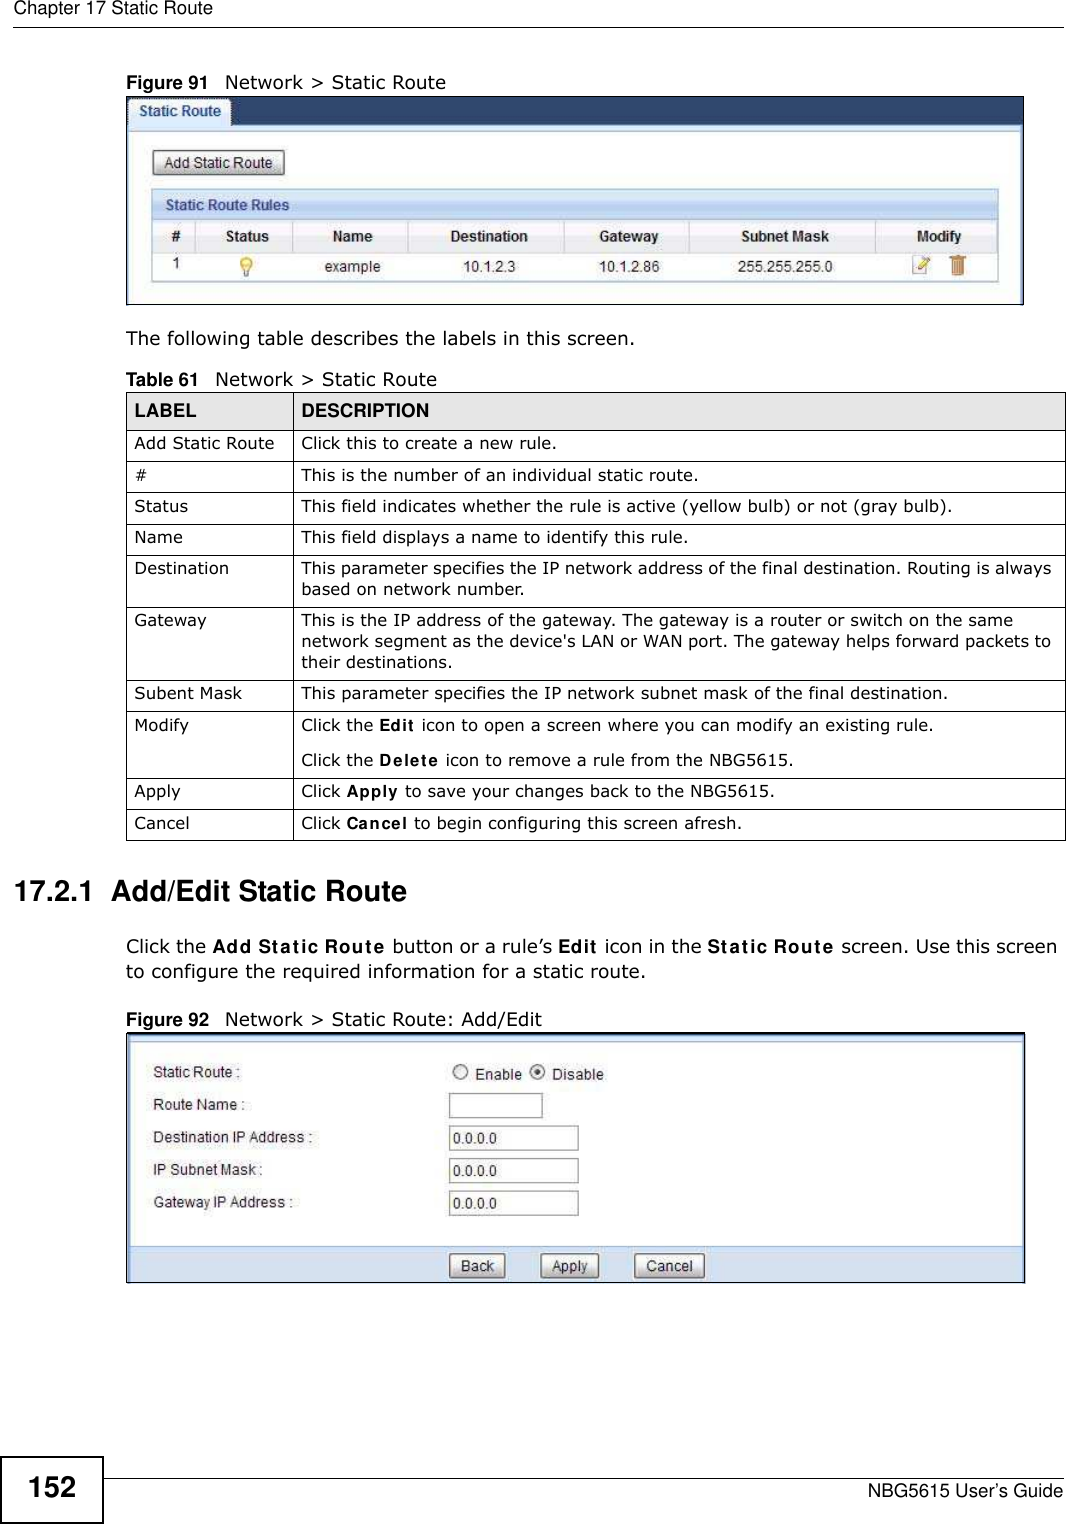 Chapter 17 Static RouteNBG5615 User’s Guide152Figure 91   Network &gt; Static RouteThe following table describes the labels in this screen. 17.2.1  Add/Edit Static Route  Click the Add Static Route button or a rule’s Edit icon in the Static Route screen. Use this screen to configure the required information for a static route. Figure 92   Network &gt; Static Route: Add/Edit Table 61   Network &gt; Static RouteLABEL DESCRIPTIONAdd Static Route Click this to create a new rule.#This is the number of an individual static route.Status This field indicates whether the rule is active (yellow bulb) or not (gray bulb).Name This field displays a name to identify this rule.Destination This parameter specifies the IP network address of the final destination. Routing is always based on network number. Gateway This is the IP address of the gateway. The gateway is a router or switch on the same network segment as the device&apos;s LAN or WAN port. The gateway helps forward packets to their destinations.Subent Mask This parameter specifies the IP network subnet mask of the final destination.Modify Click the Edit icon to open a screen where you can modify an existing rule. Click the Delete icon to remove a rule from the NBG5615.Apply Click Apply to save your changes back to the NBG5615.Cancel Click Cancel to begin configuring this screen afresh.